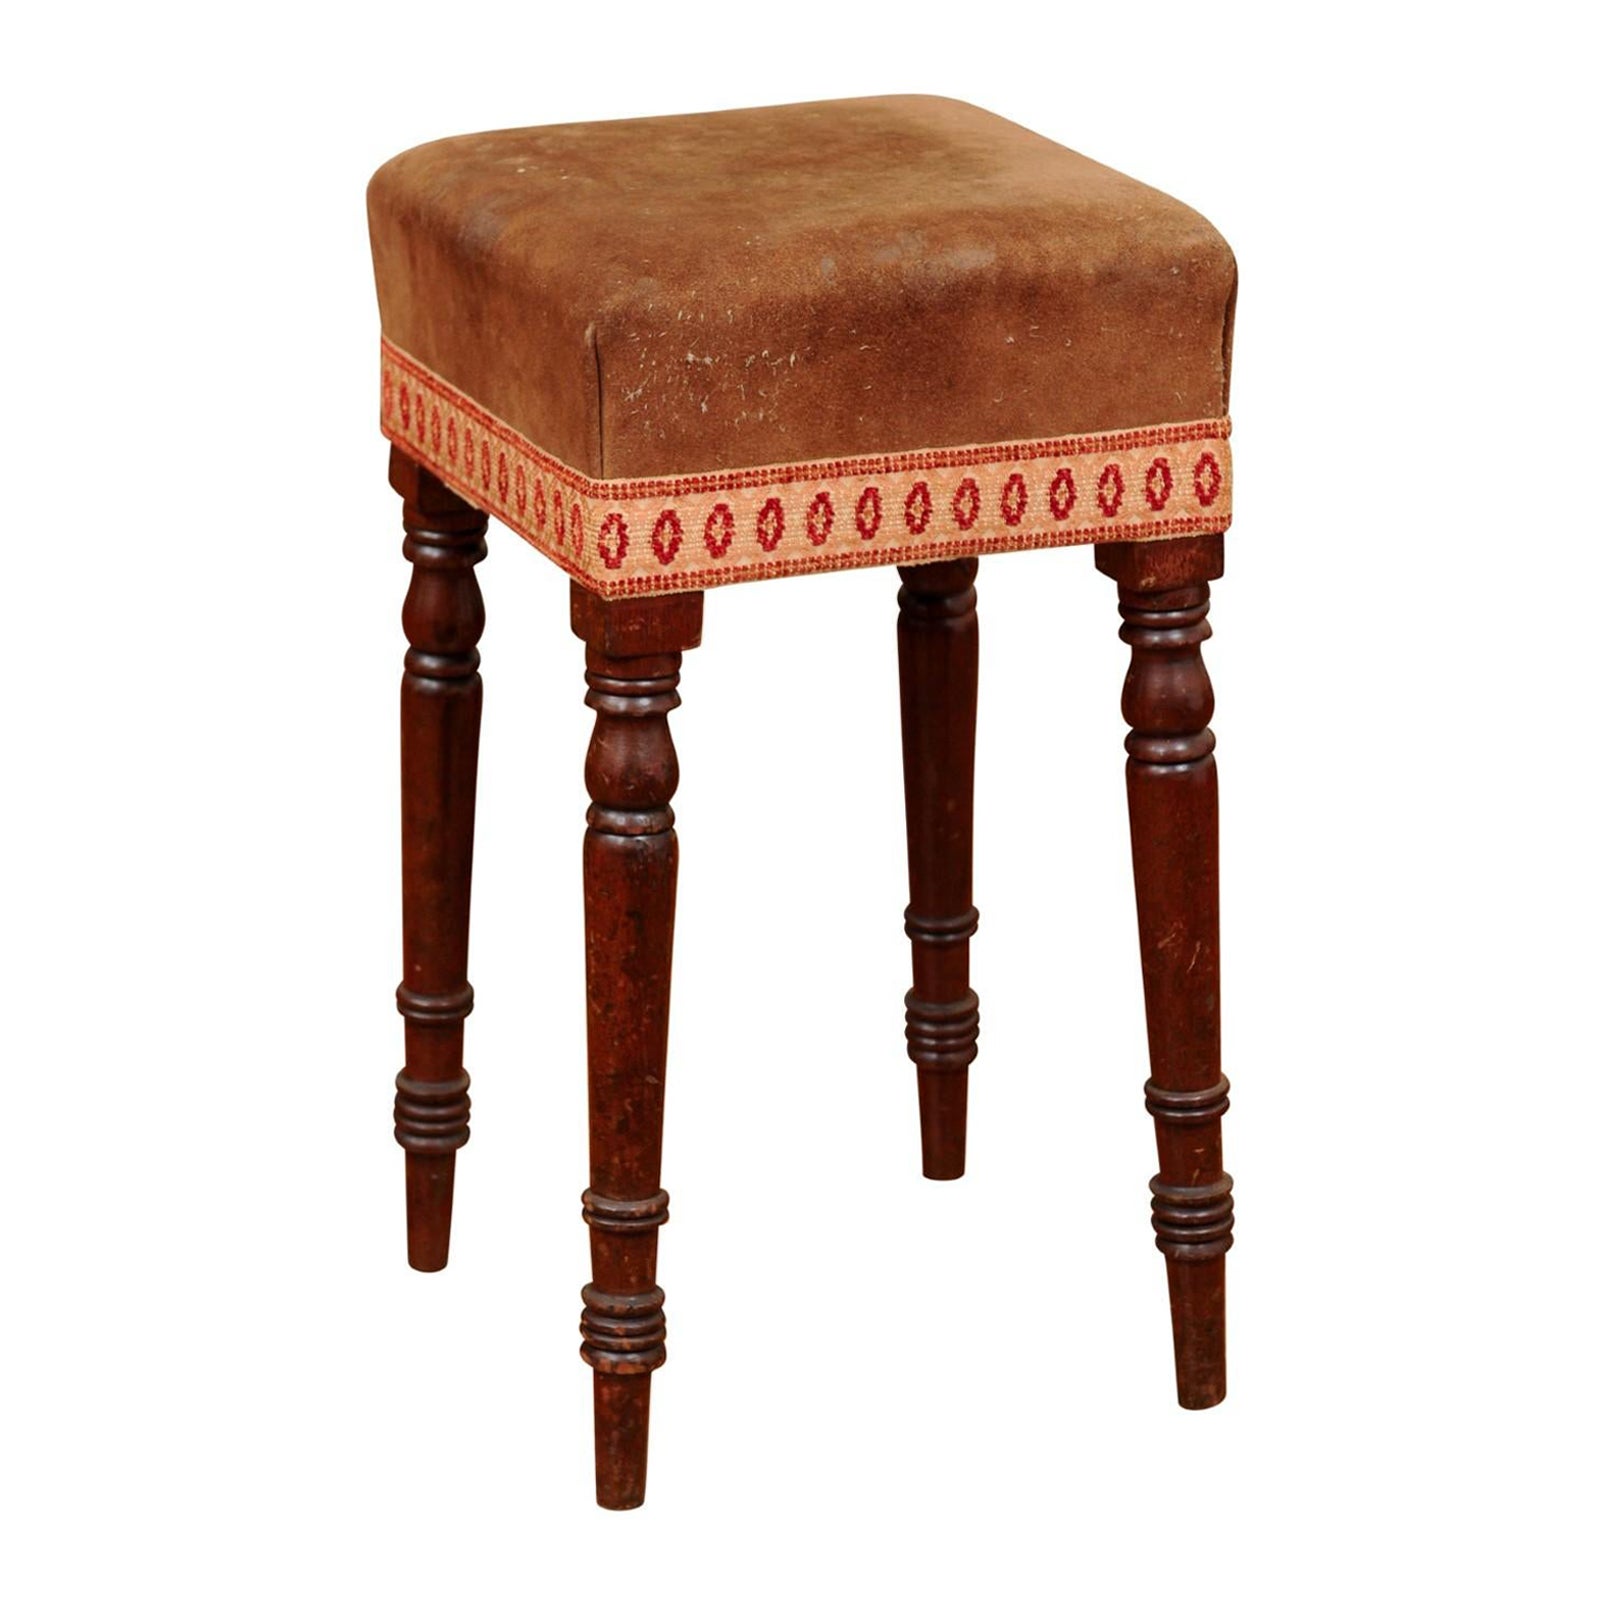 Early 19th Century English Mahogany Stool with Turned Legs & Suede Upholstery For Sale